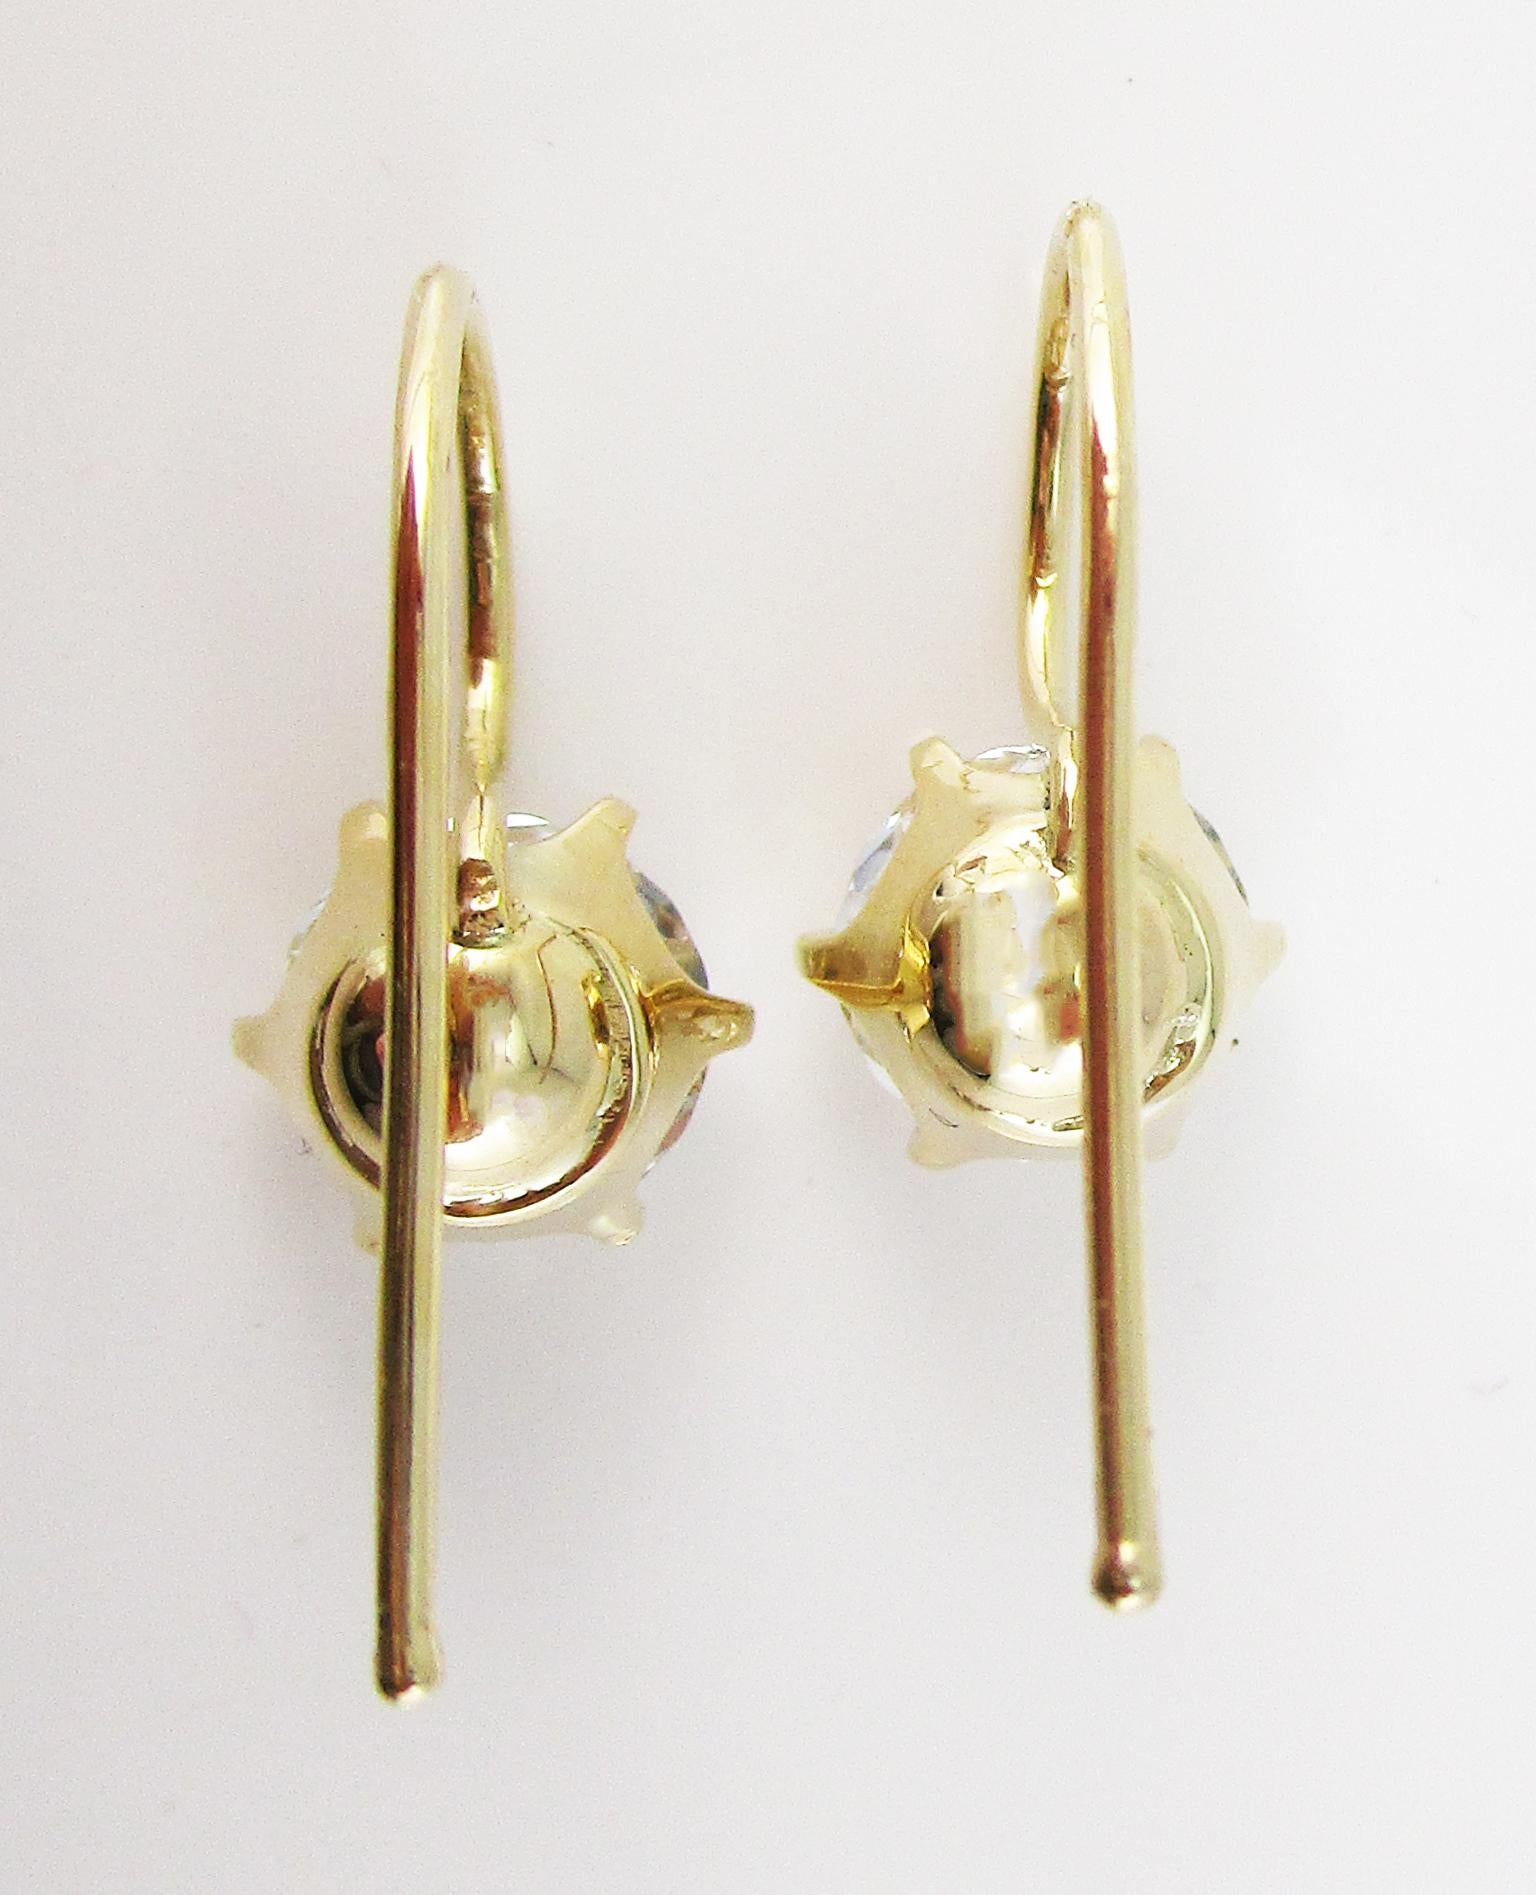 1890 Victorian 14 Karat Yellow Gold Silver Topaz Drop Earrings In Good Condition For Sale In Lexington, KY